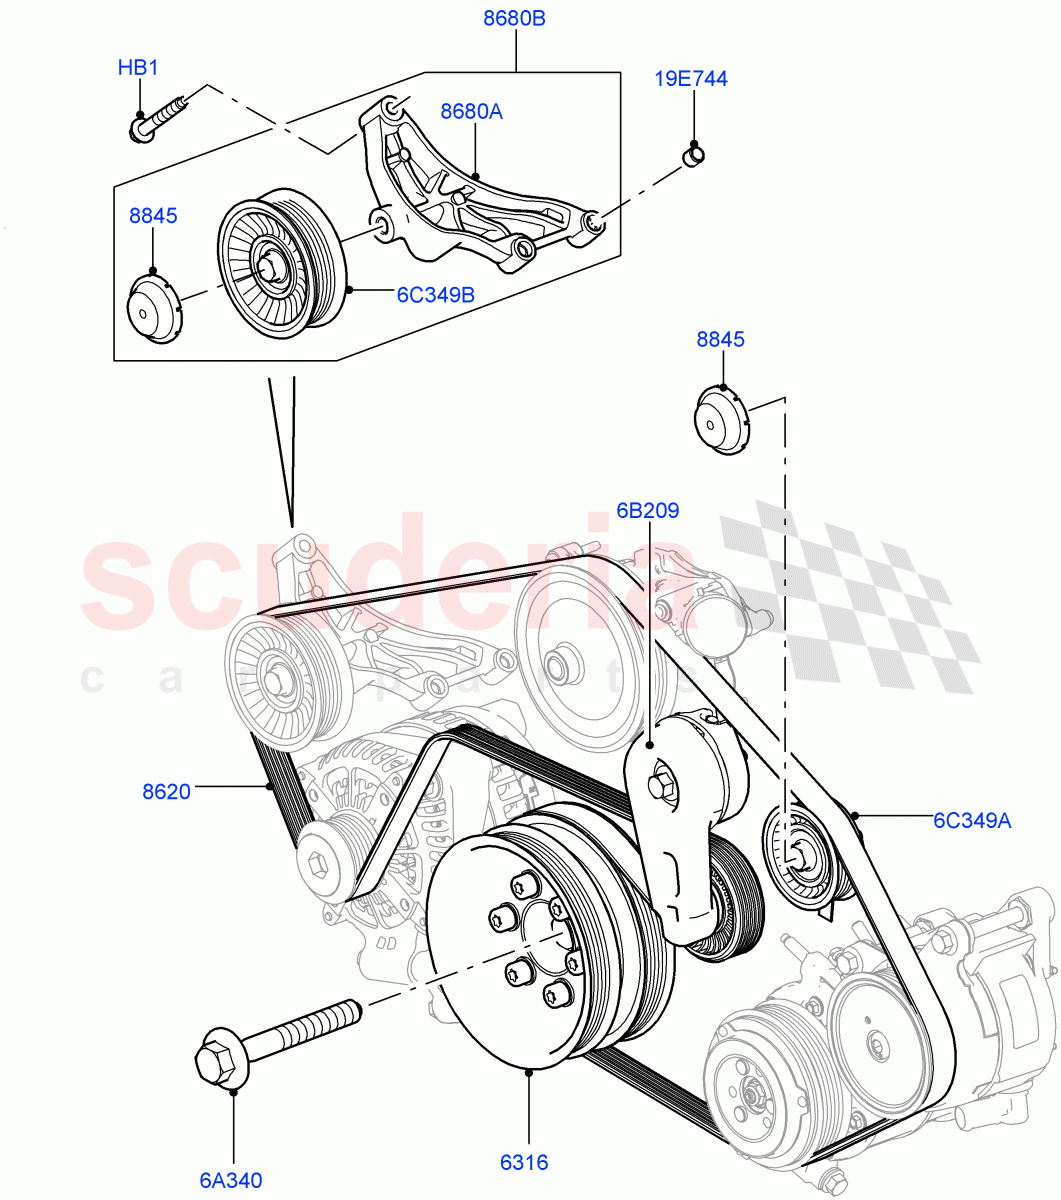 Pulleys And Drive Belts(Primary Drive)(5.0L OHC SGDI SC V8 Petrol - AJ133)((V)TOHA999999) of Land Rover Land Rover Range Rover (2012-2021) [5.0 OHC SGDI SC V8 Petrol]